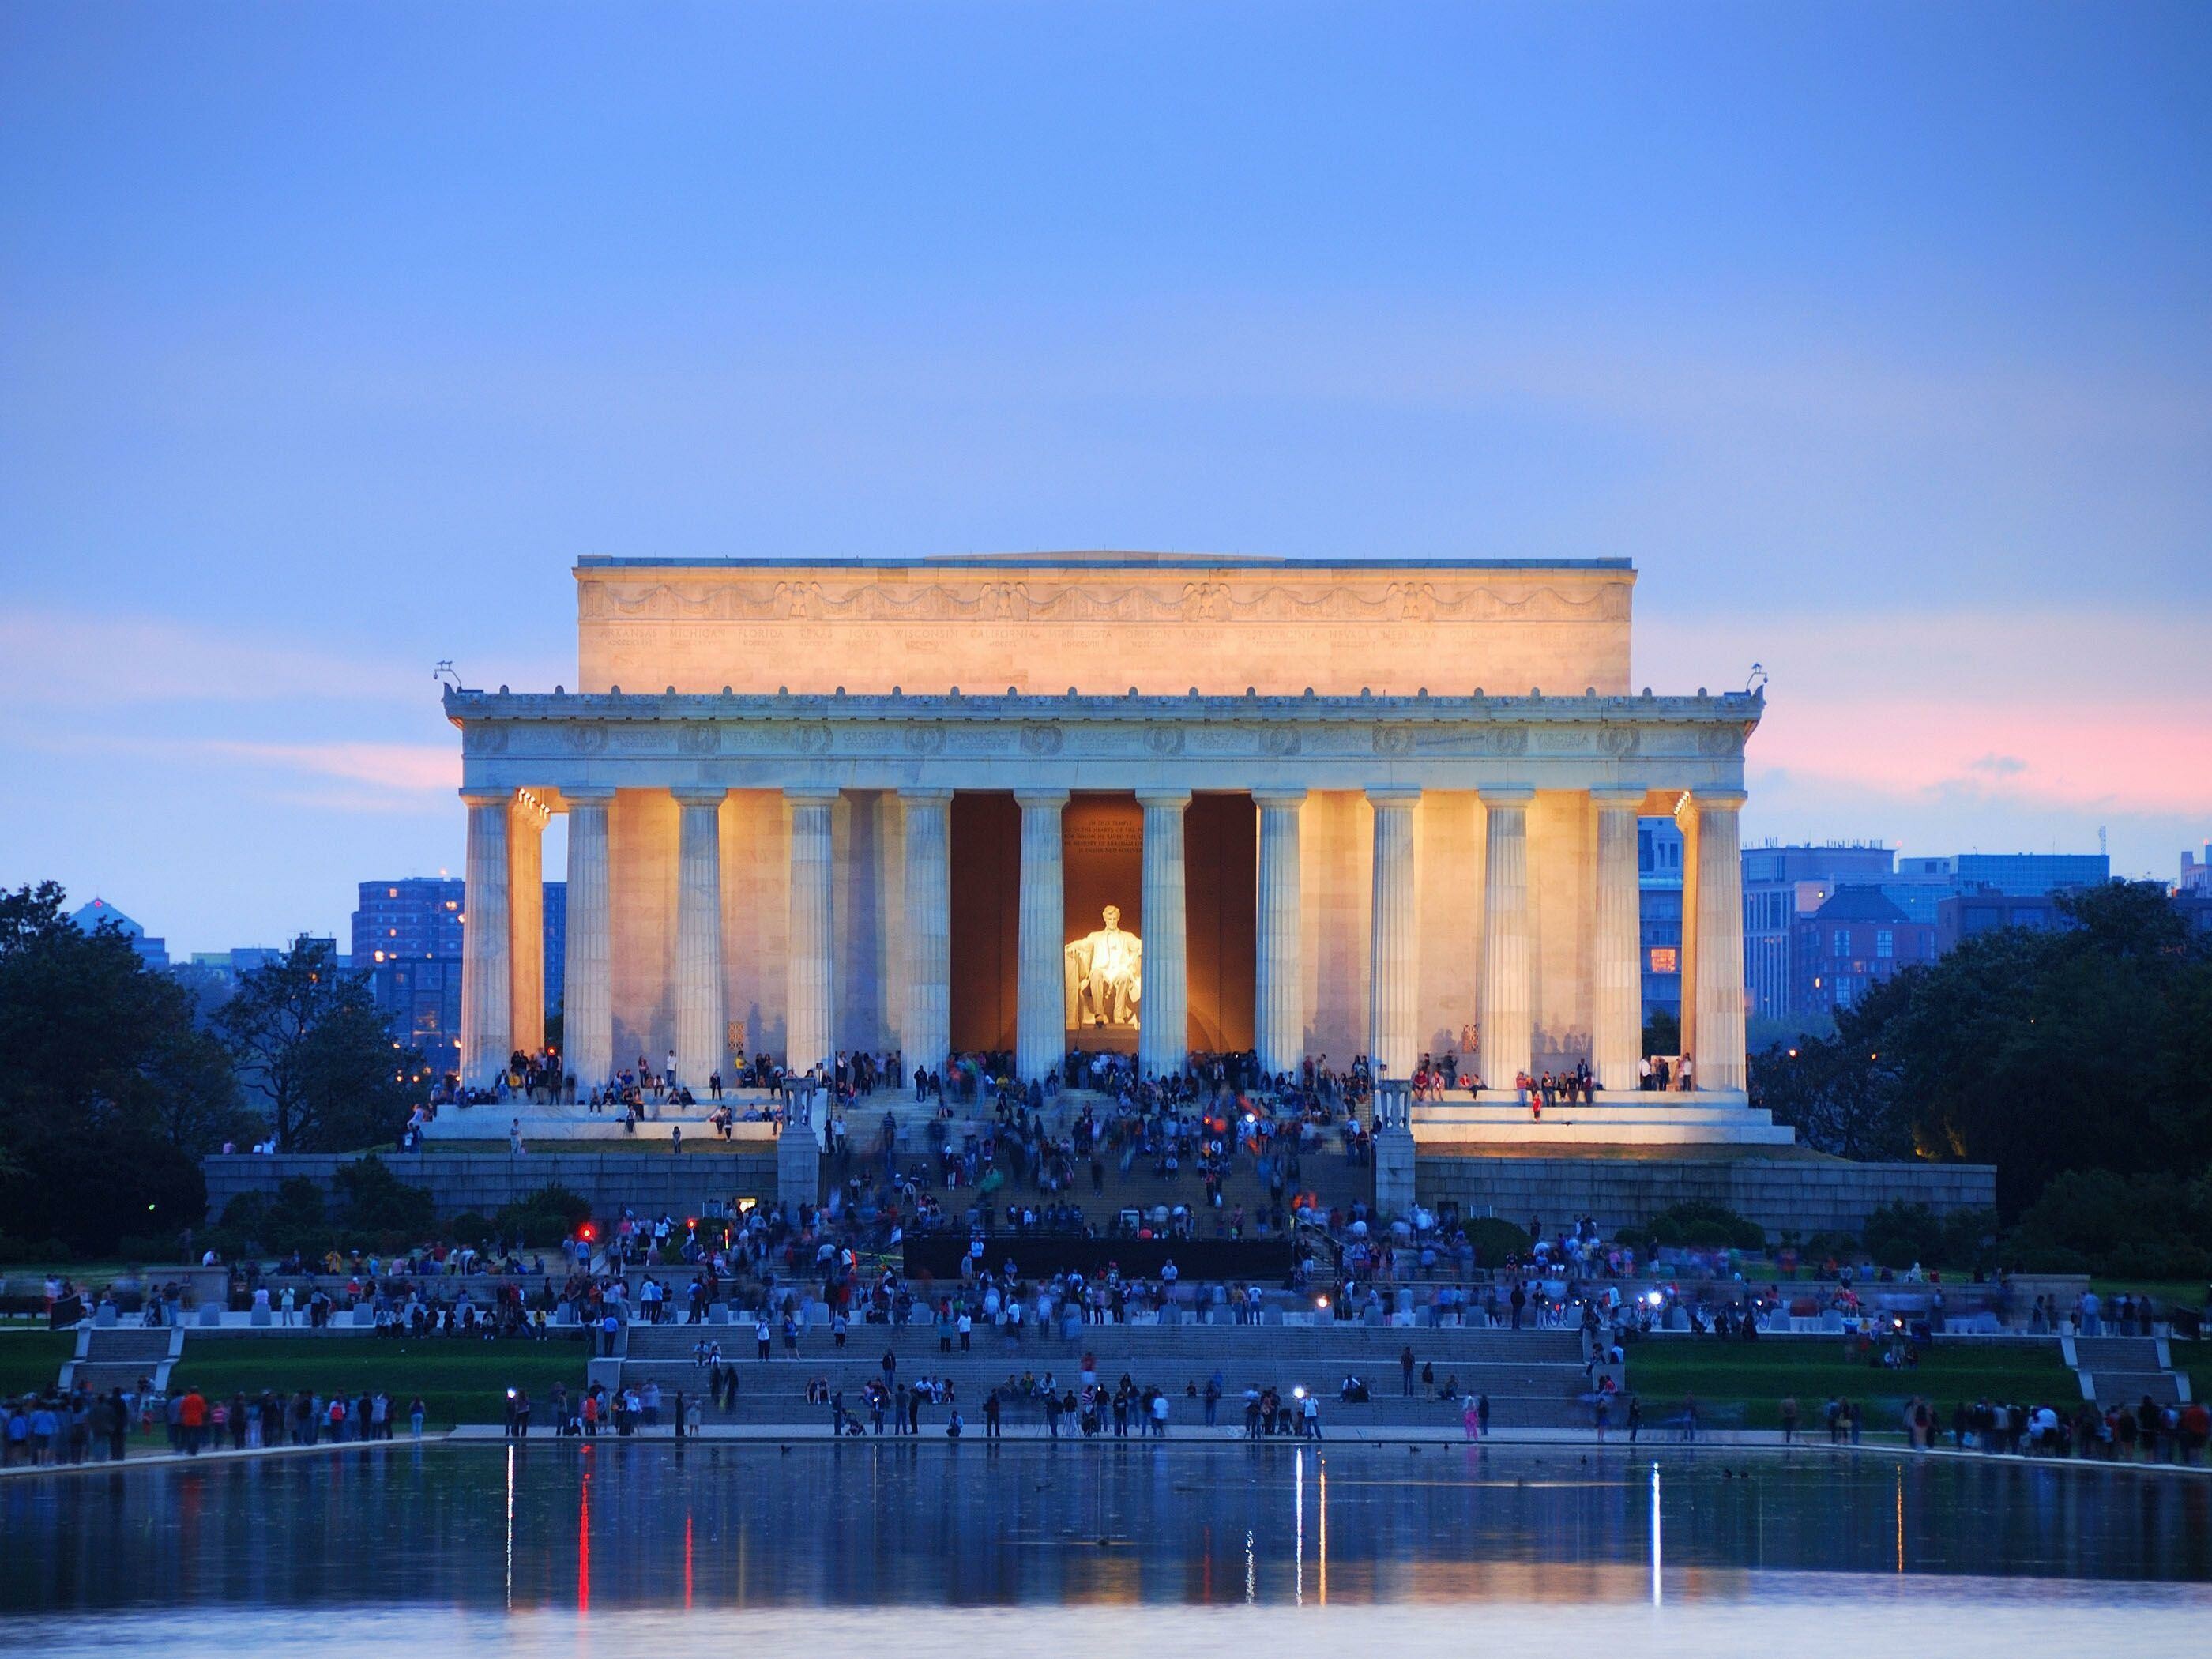 Lincoln Memorial: Built to honor the 16th president of the United States, Abraham Lincoln. 2800x2100 HD Wallpaper.